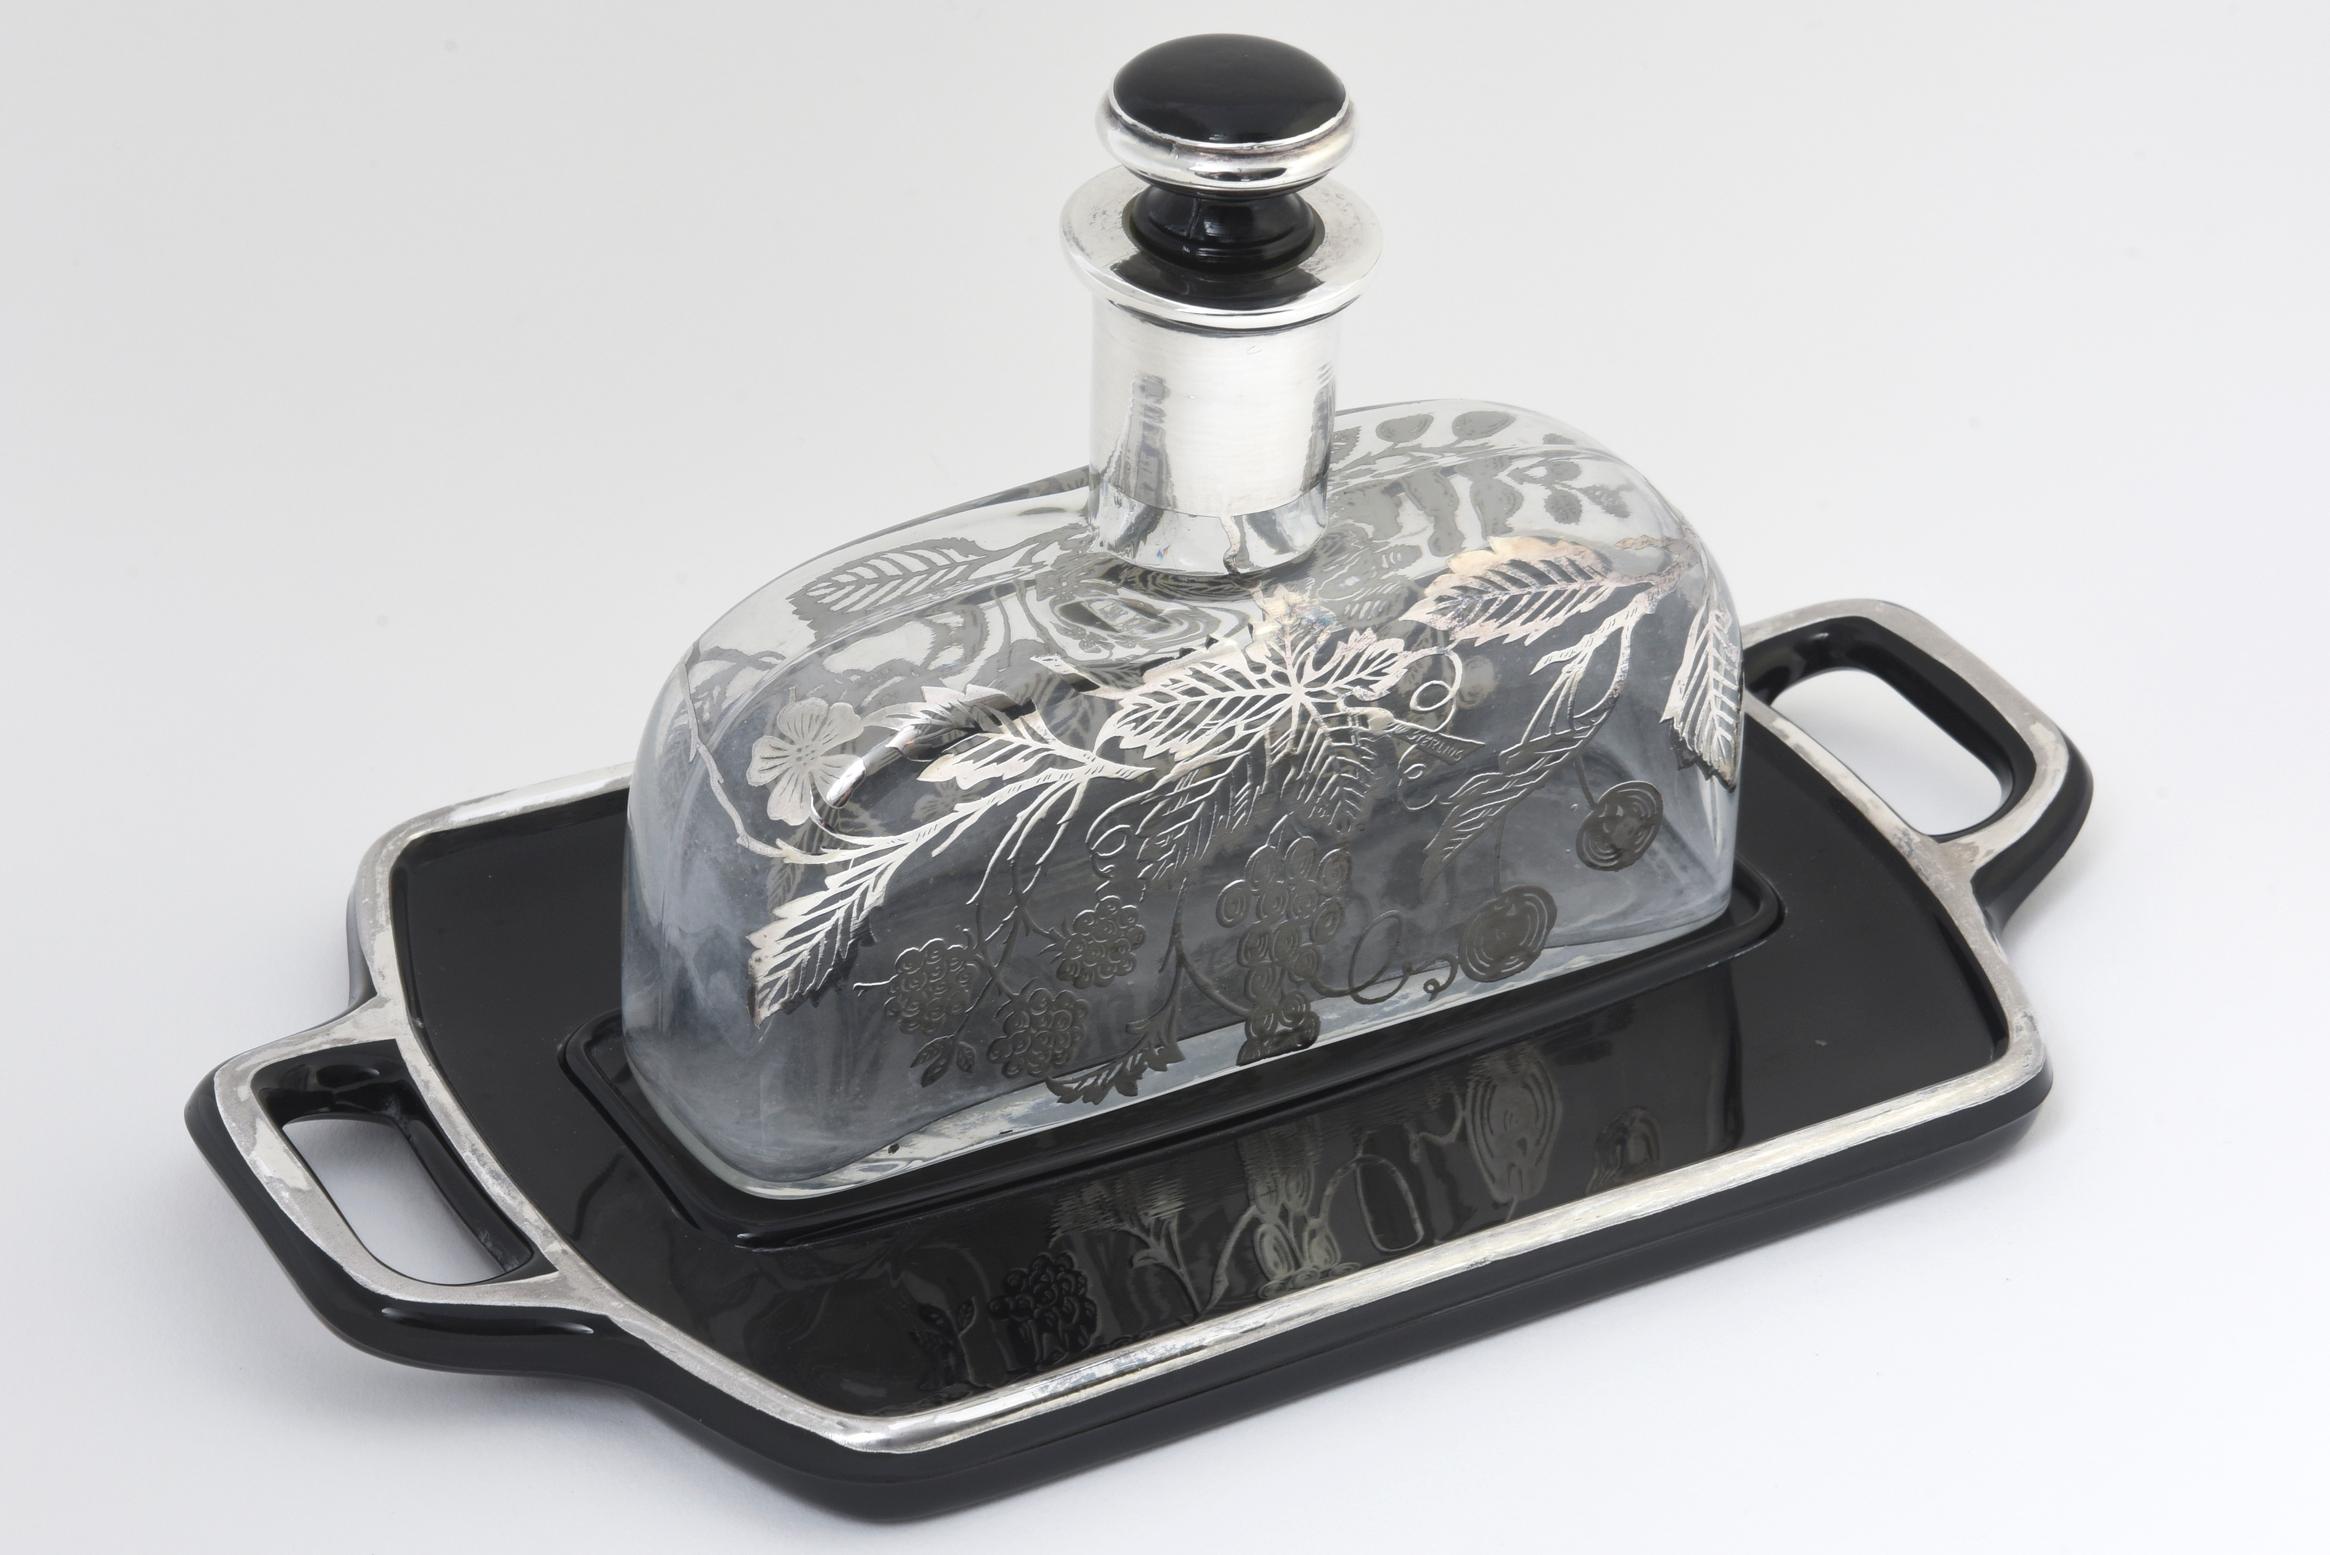 Large clear glass perfume bottle with sterling silver overlay. Tray and stopper are made from black glass with a sterling-silver border. Age wear, light white residue inside bottom. Marked 